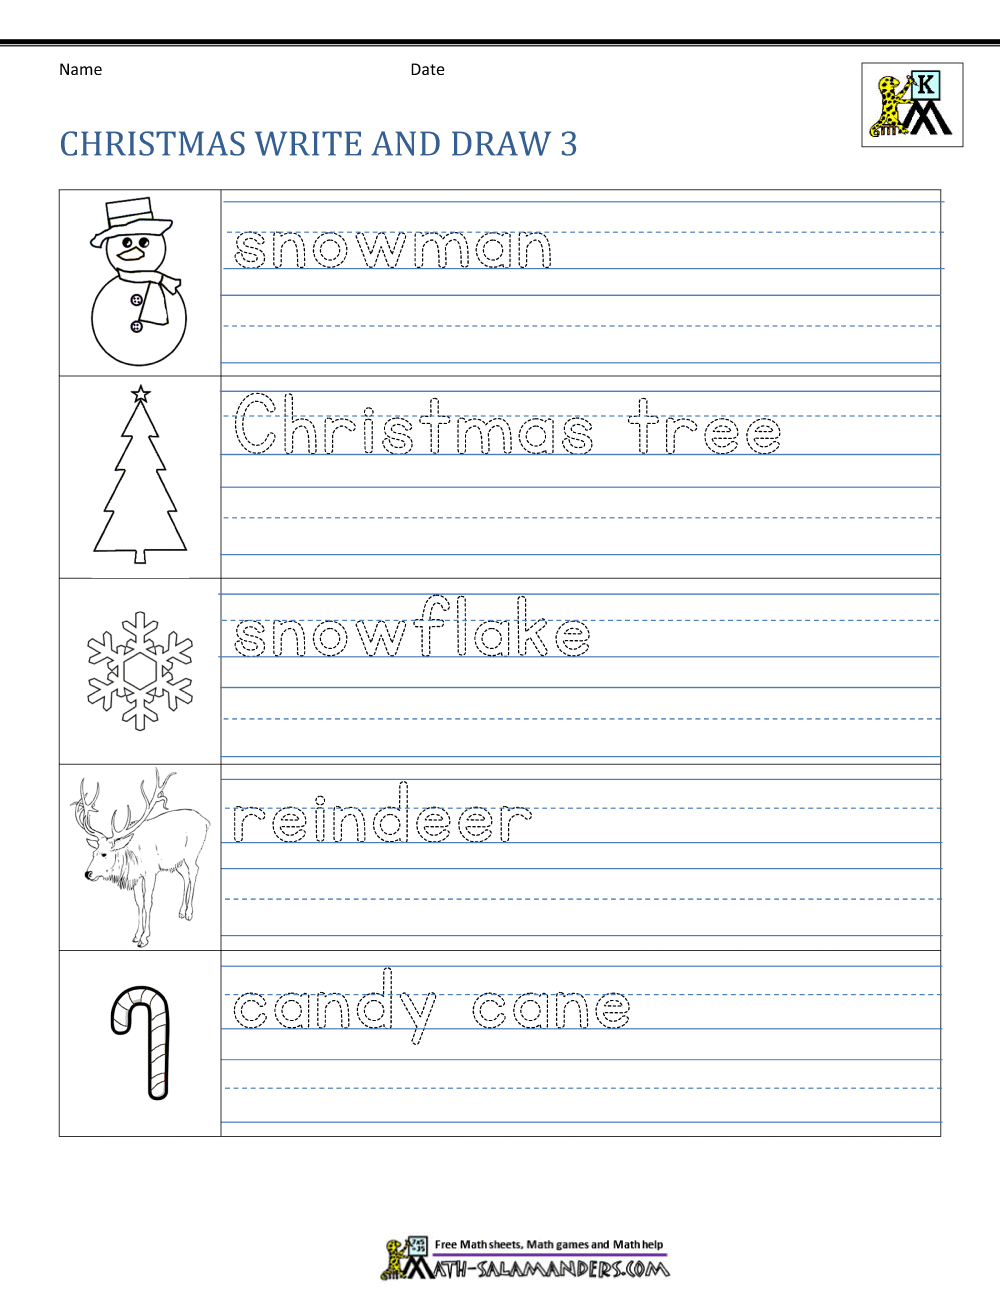 Free Christmas Worksheets for kids